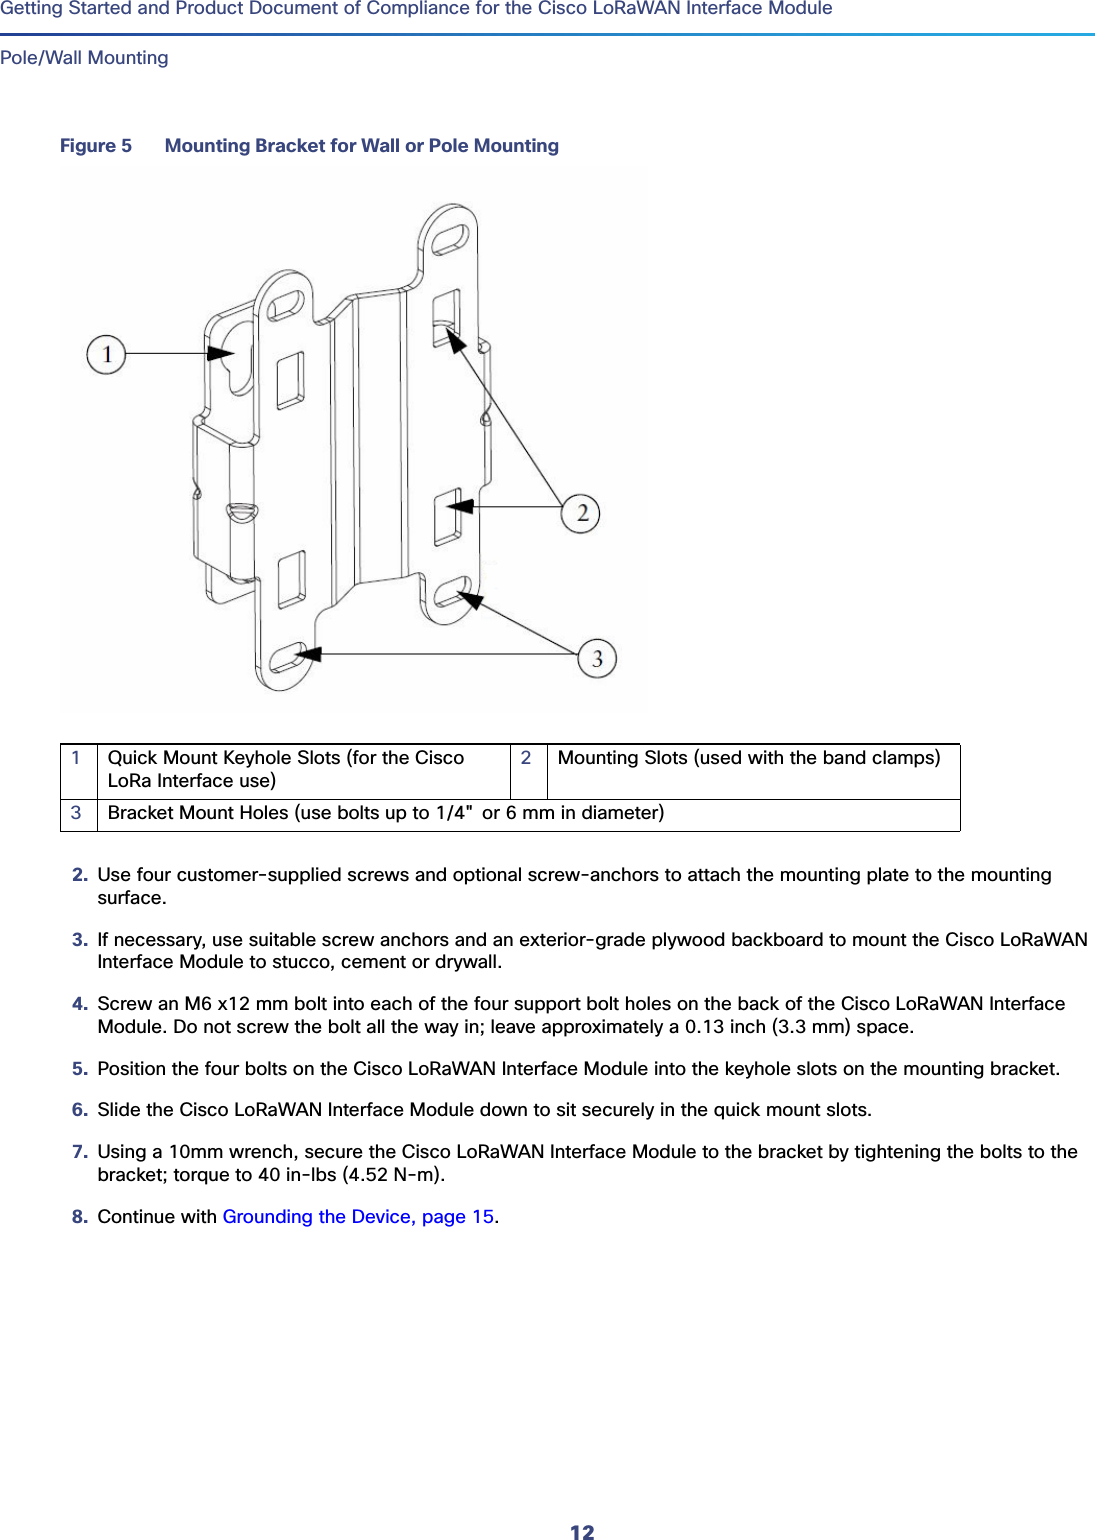 12Getting Started and Product Document of Compliance for the Cisco LoRaWAN Interface Module Pole/Wall MountingFigure 5 Mounting Bracket for Wall or Pole Mounting2. Use four customer-supplied screws and optional screw-anchors to attach the mounting plate to the mounting surface.3. If necessary, use suitable screw anchors and an exterior-grade plywood backboard to mount the Cisco LoRaWAN Interface Module to stucco, cement or drywall.4. Screw an M6 x12 mm bolt into each of the four support bolt holes on the back of the Cisco LoRaWAN Interface Module. Do not screw the bolt all the way in; leave approximately a 0.13 inch (3.3 mm) space.5. Position the four bolts on the Cisco LoRaWAN Interface Module into the keyhole slots on the mounting bracket. 6. Slide the Cisco LoRaWAN Interface Module down to sit securely in the quick mount slots.7. Using a 10mm wrench, secure the Cisco LoRaWAN Interface Module to the bracket by tightening the bolts to the bracket; torque to 40 in-lbs (4.52 N-m).8. Continue with Grounding the Device, page 15. 1Quick Mount Keyhole Slots (for the Cisco LoRa Interface use)2Mounting Slots (used with the band clamps)3Bracket Mount Holes (use bolts up to 1/4&quot; or 6 mm in diameter)